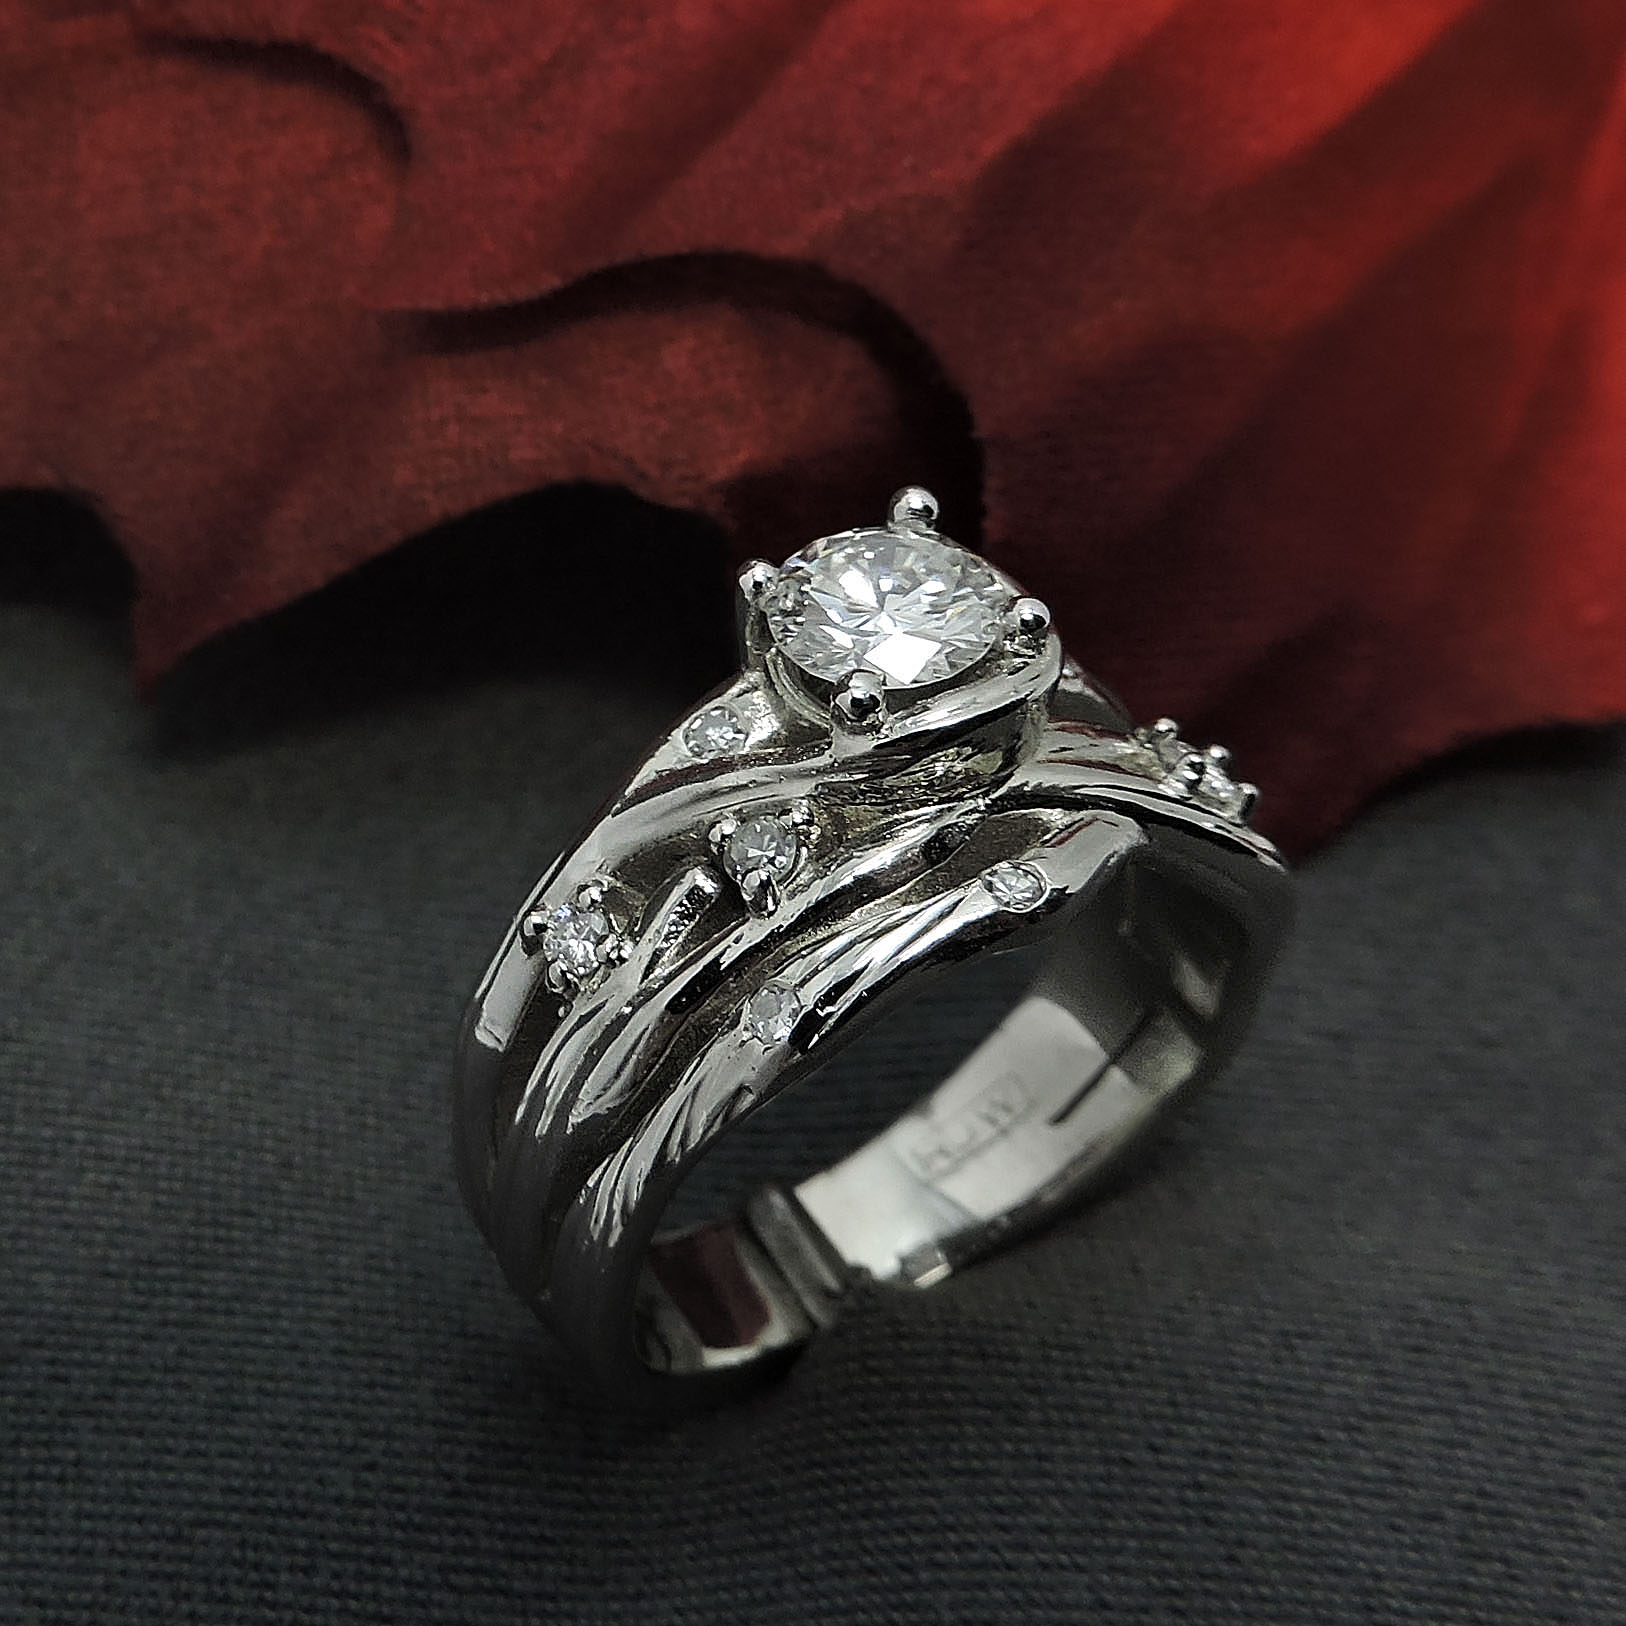 Branch Ring with Moissanite Stone